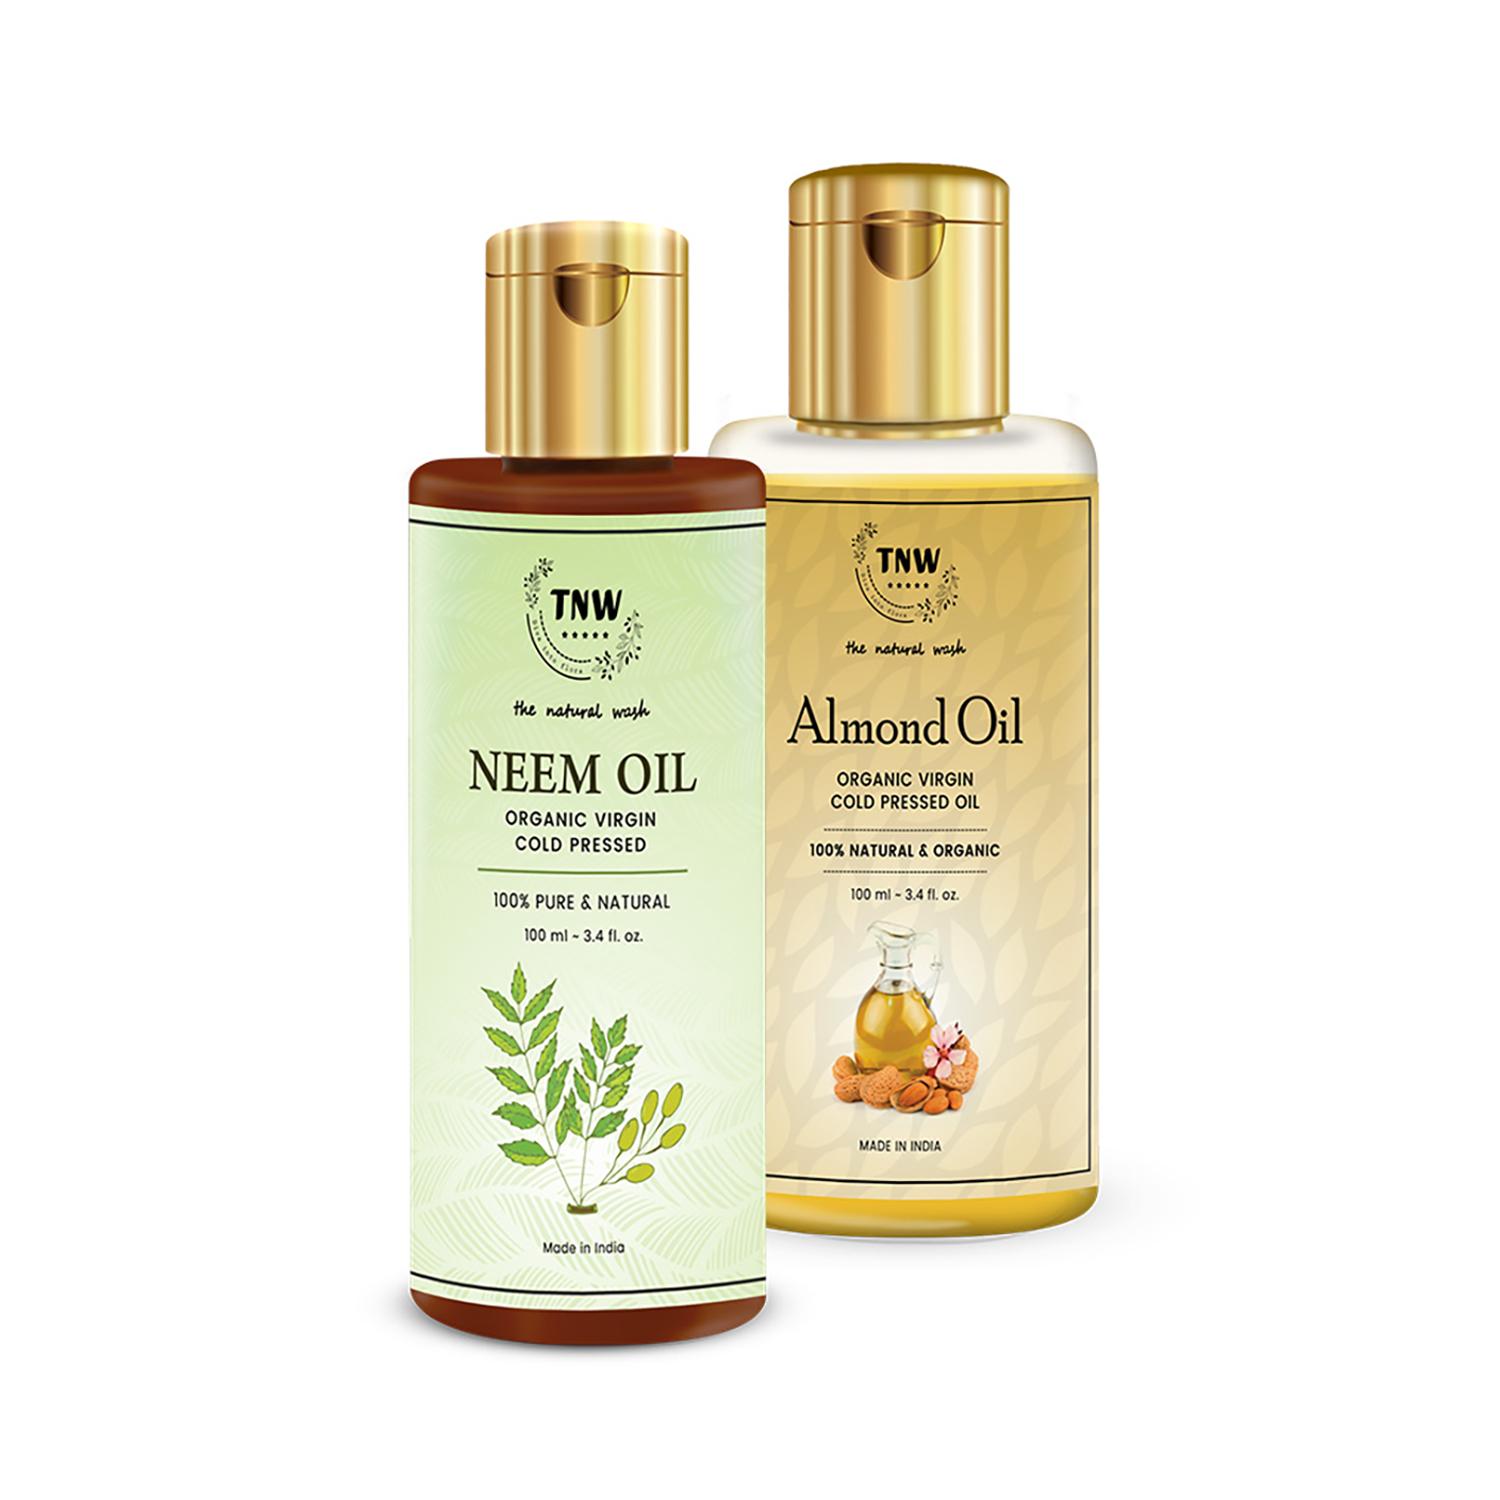 TNW The Natural Wash | TNW - The Natural Wash Almond Oil and Neem Oil Combo